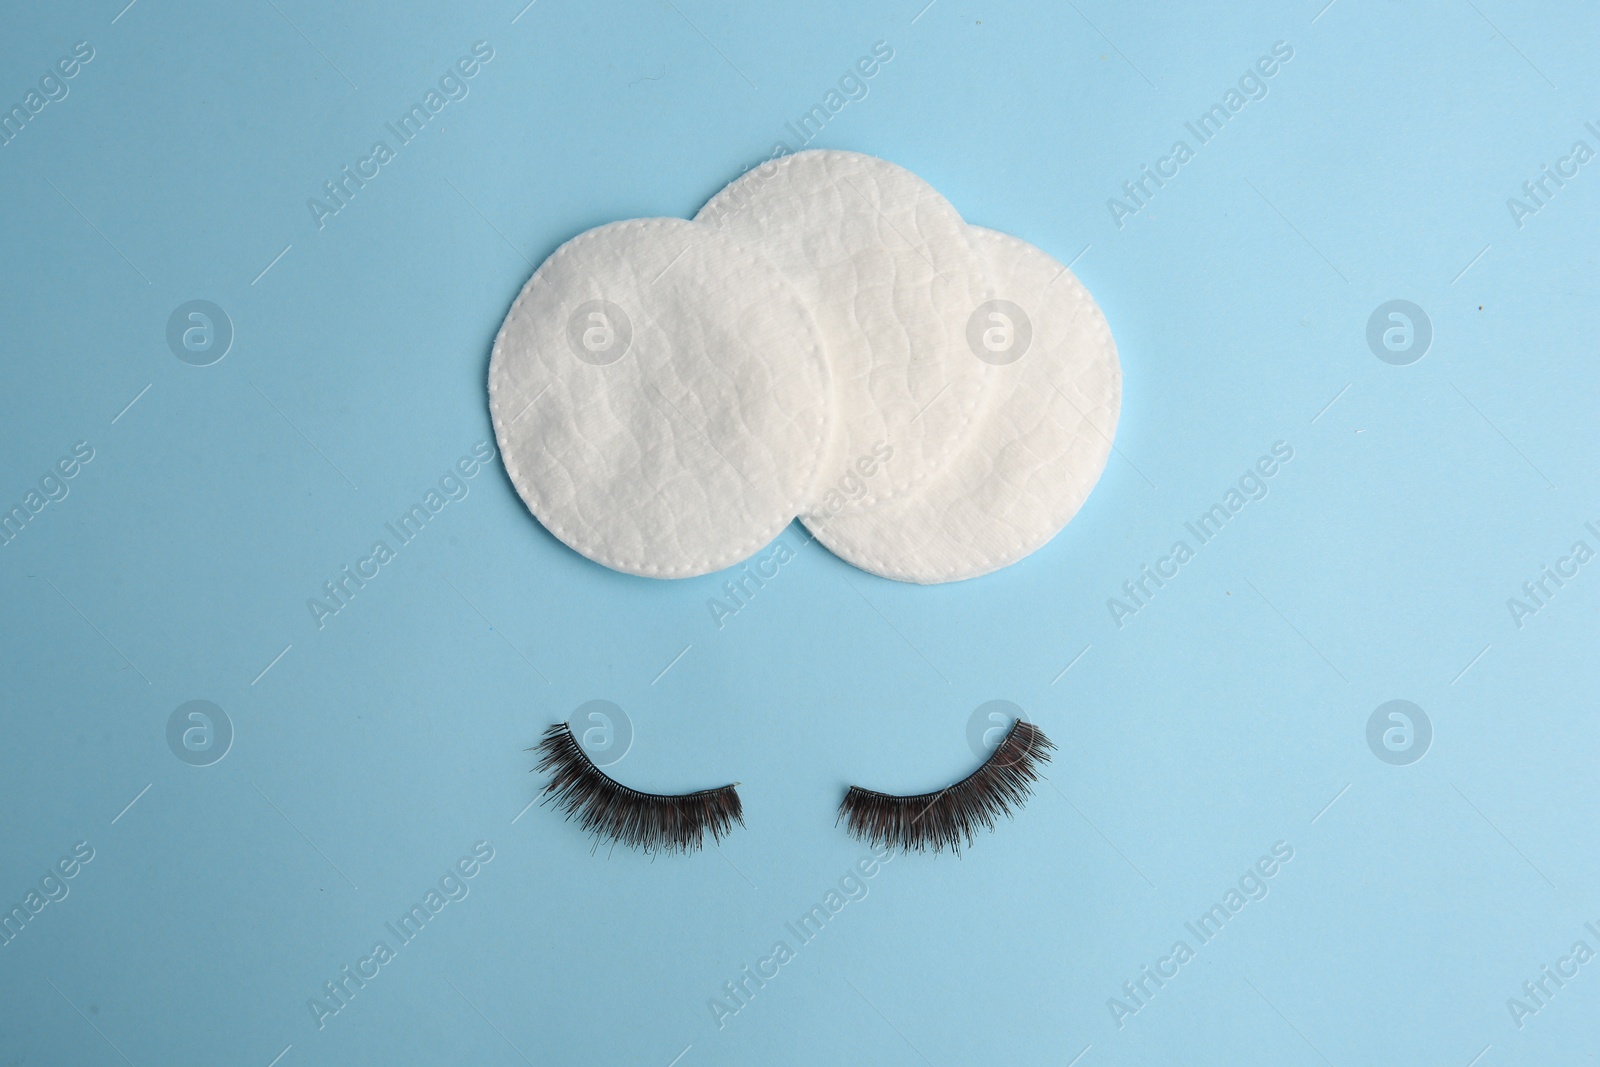 Photo of Cotton pads for makeup removal and false eyelashes on light blue background, flat lay